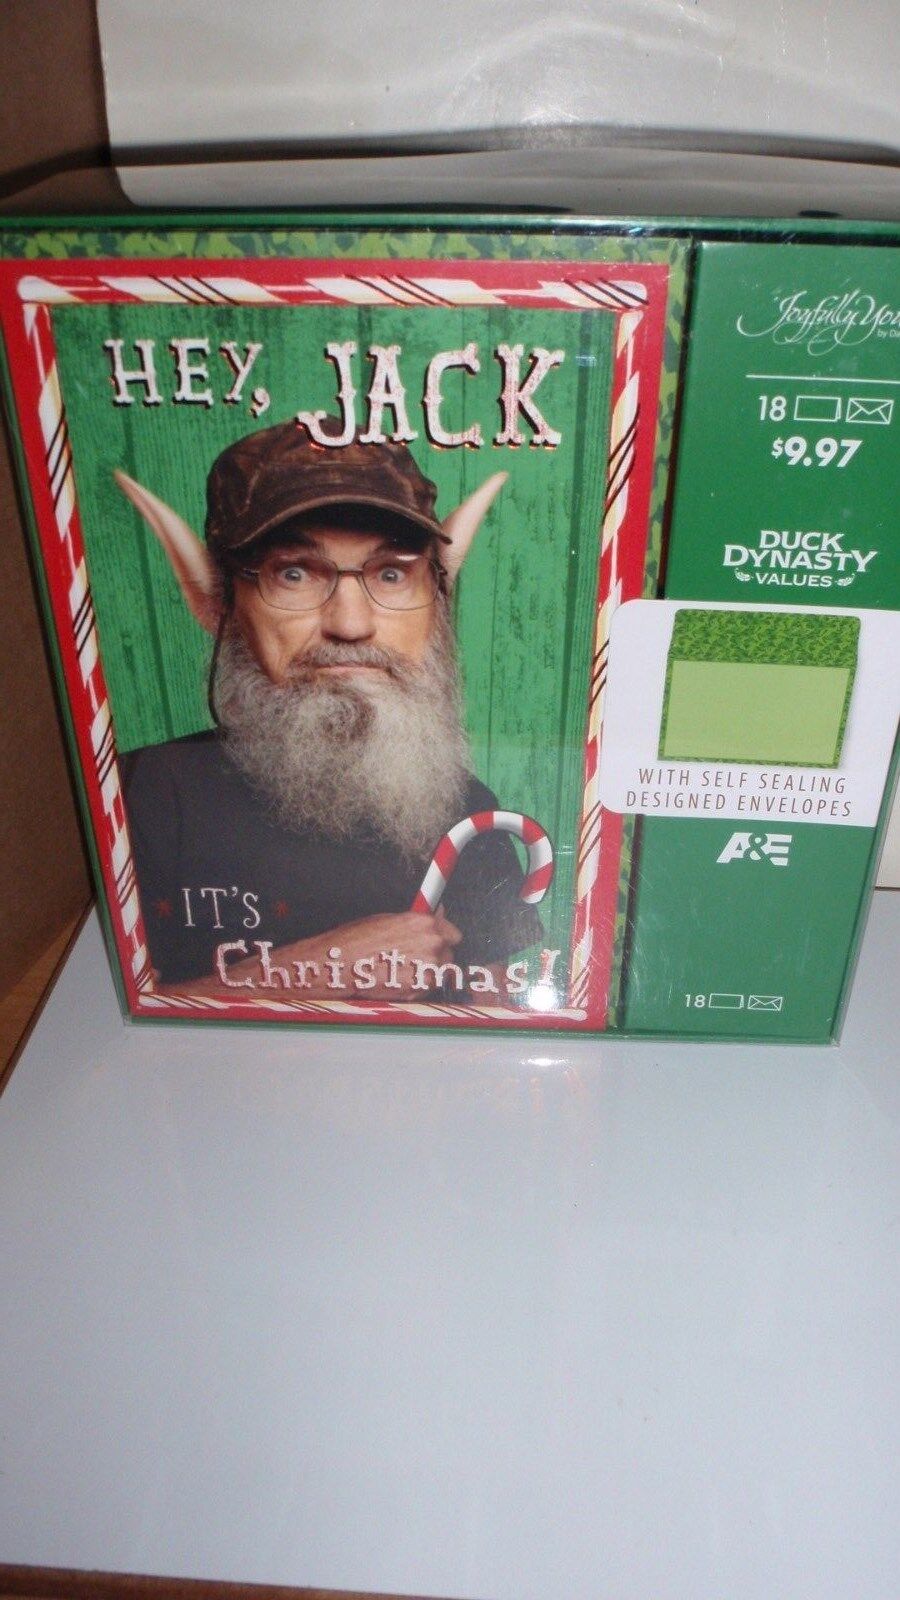 DUCK DYNASTY CHRISTMAS CARDS 18 PC SET UNCLE SI HEY JACK IT'S CHRISTMAS DESIGN 